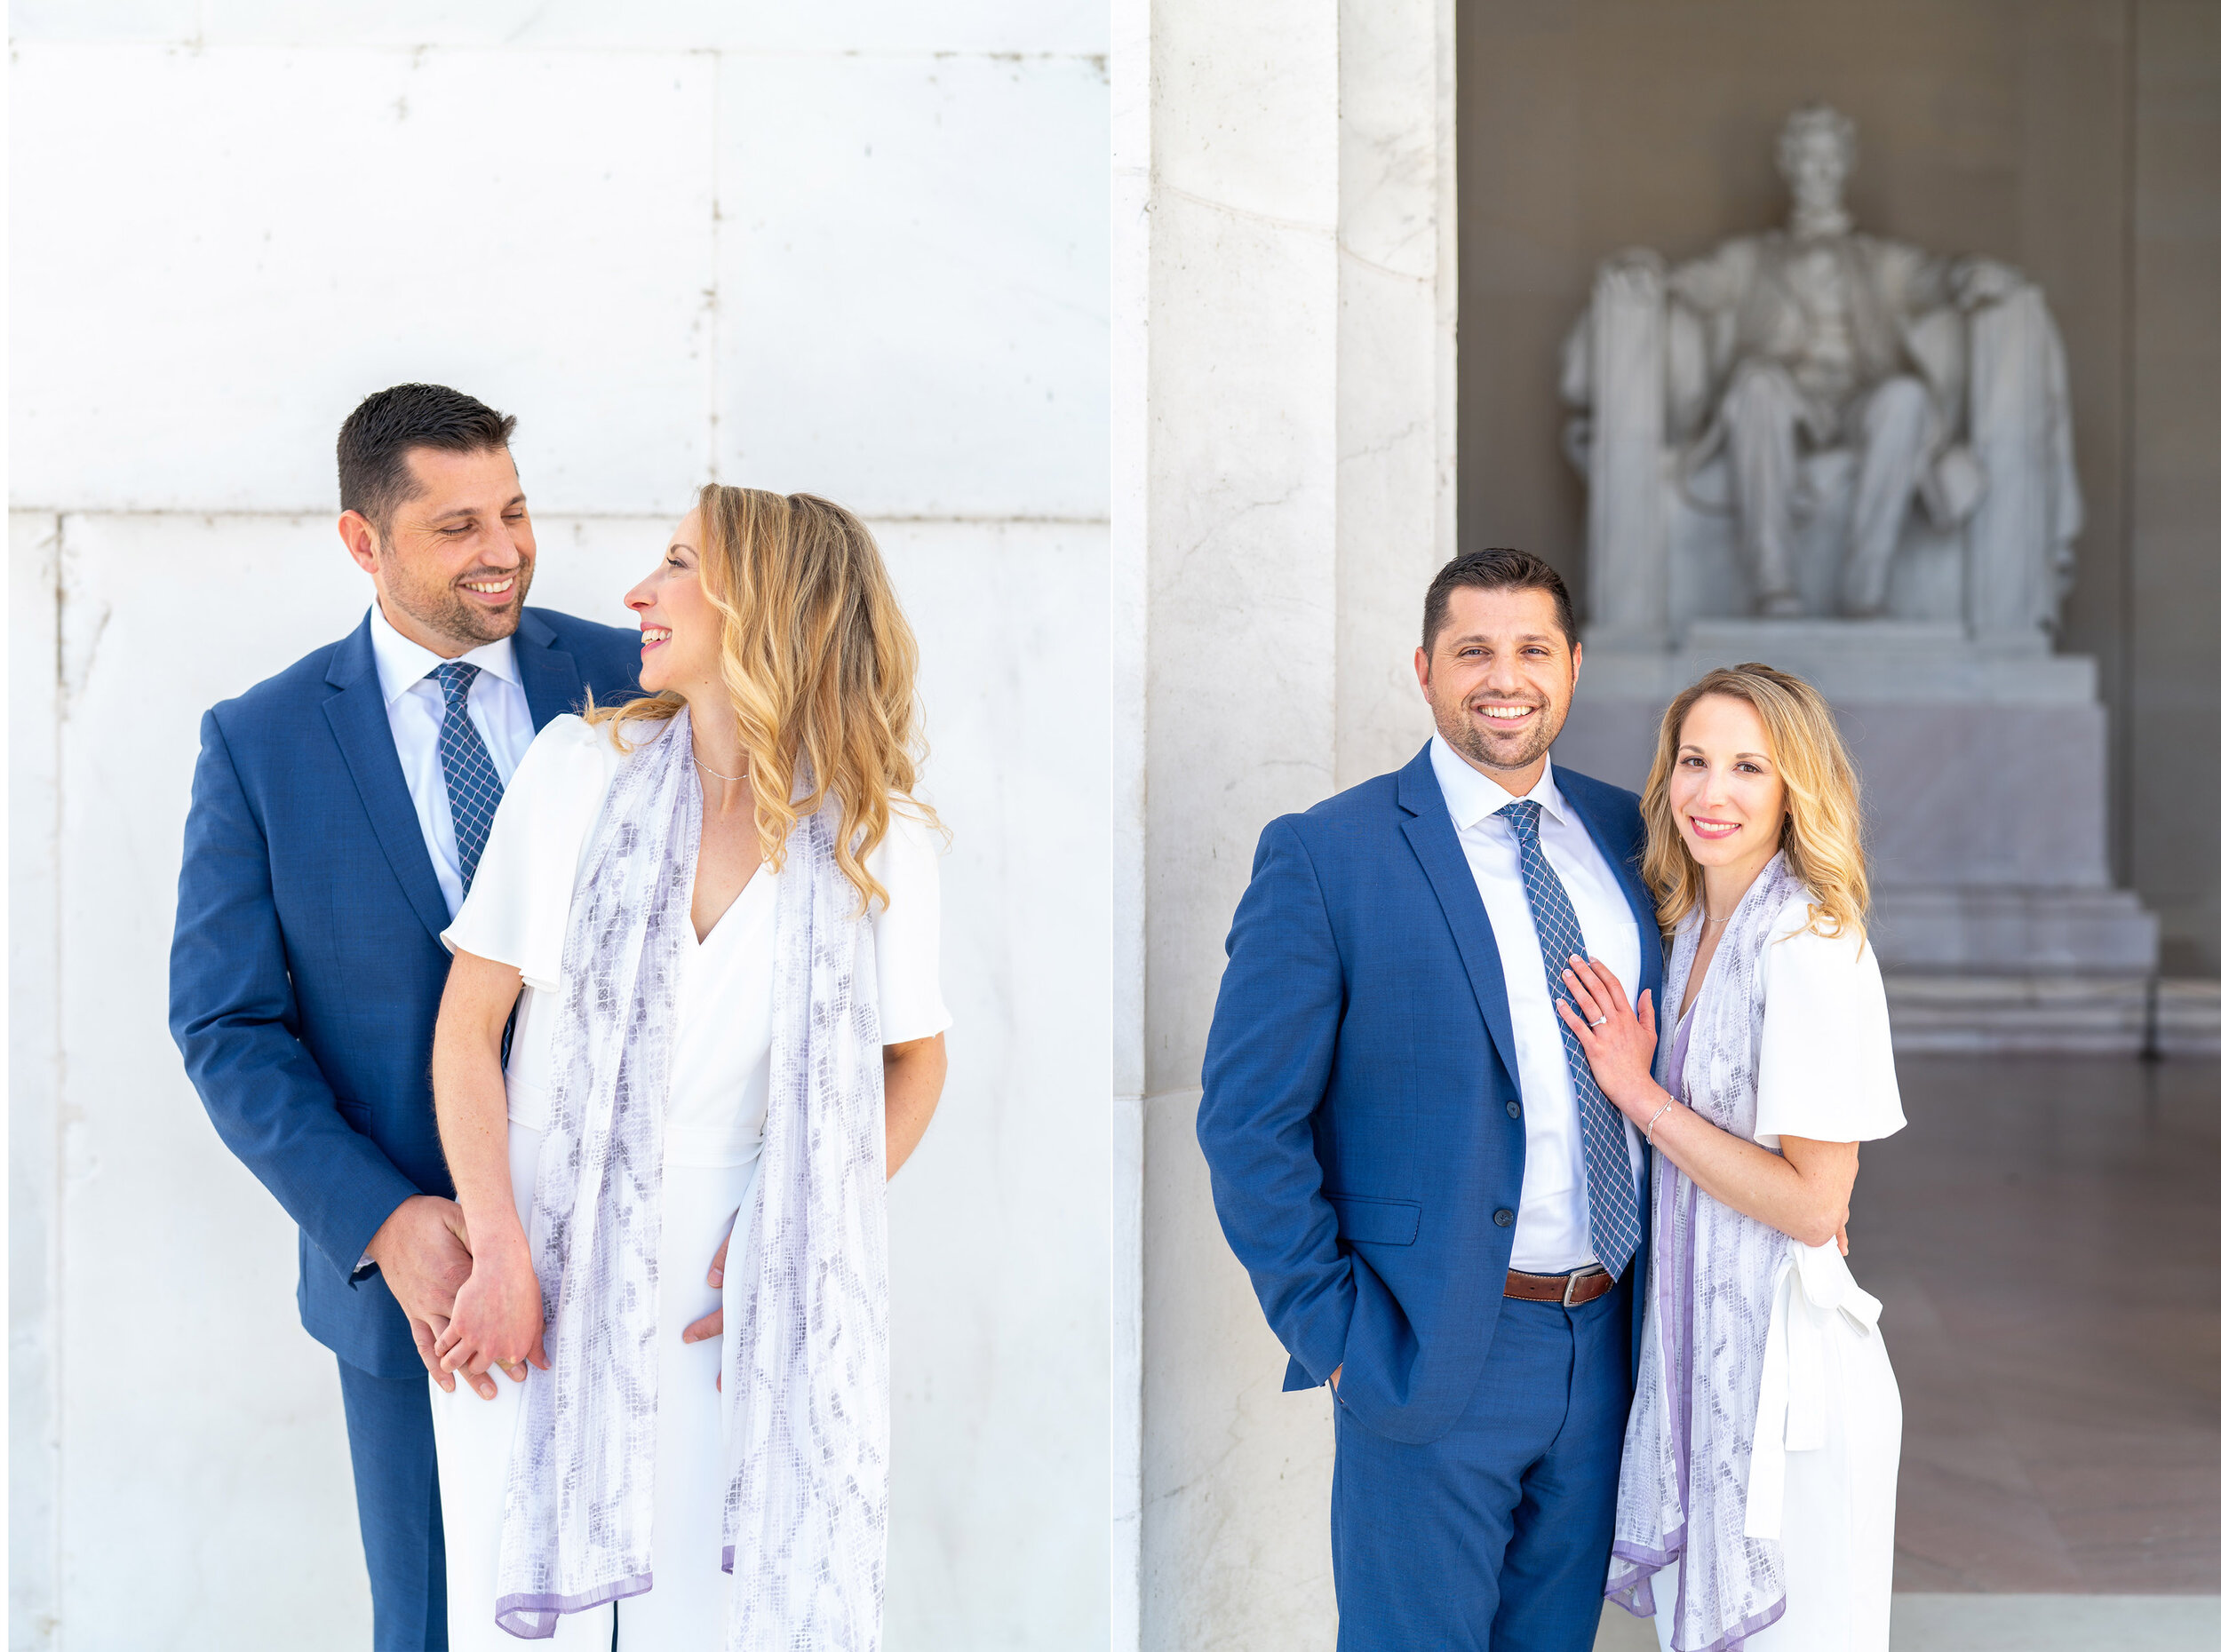 Engagement session at the Lincoln Memorial in DC